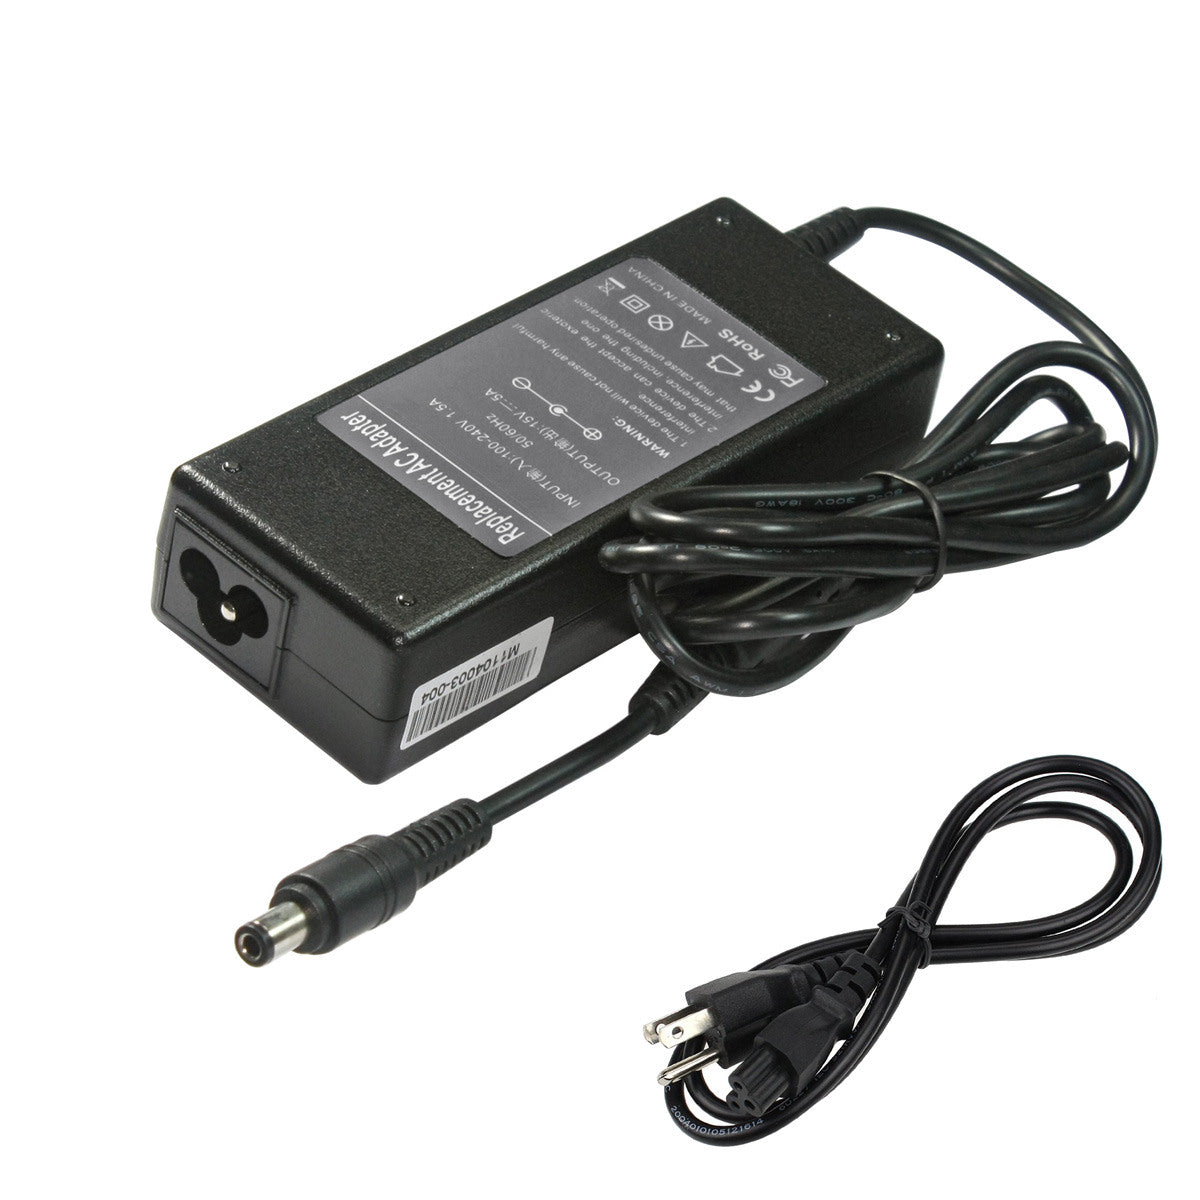 Compatible Replacement Toshiba Satellite M55-S331 AC Adapter 75Watt 15V 5A.